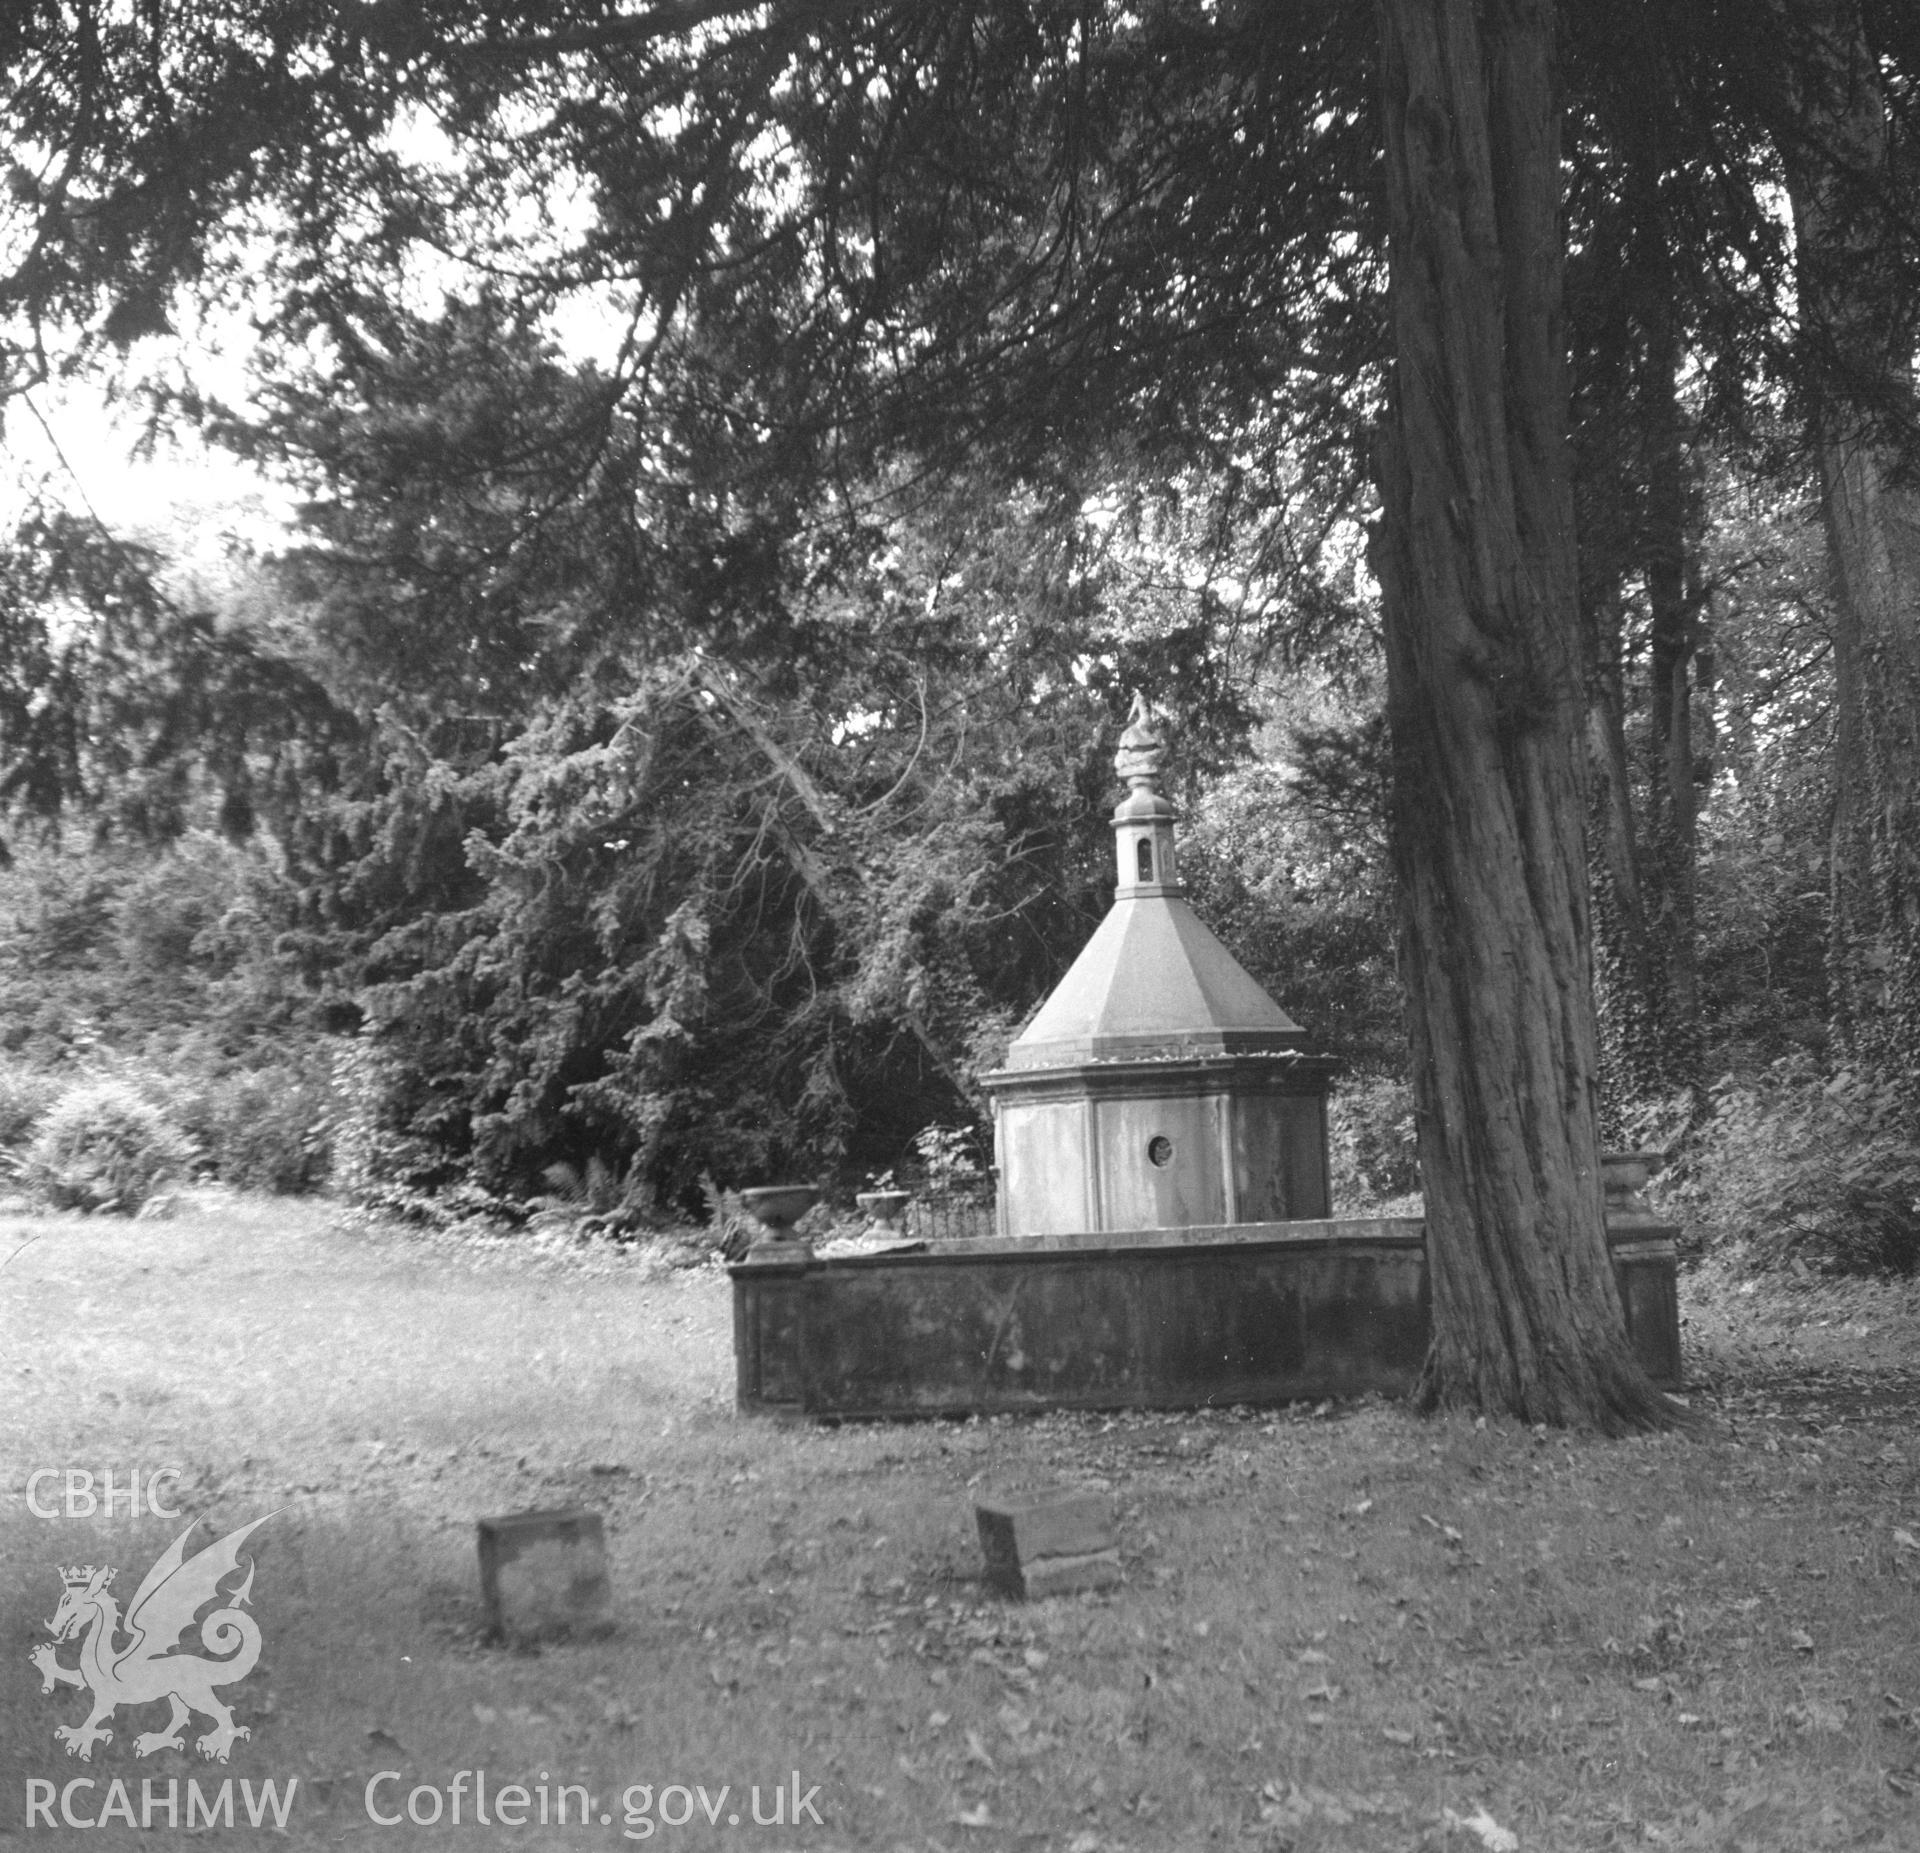 Digital copy of an undated nitrate negative showing a view of St Marys Well and Bath, Bodrhyddan.